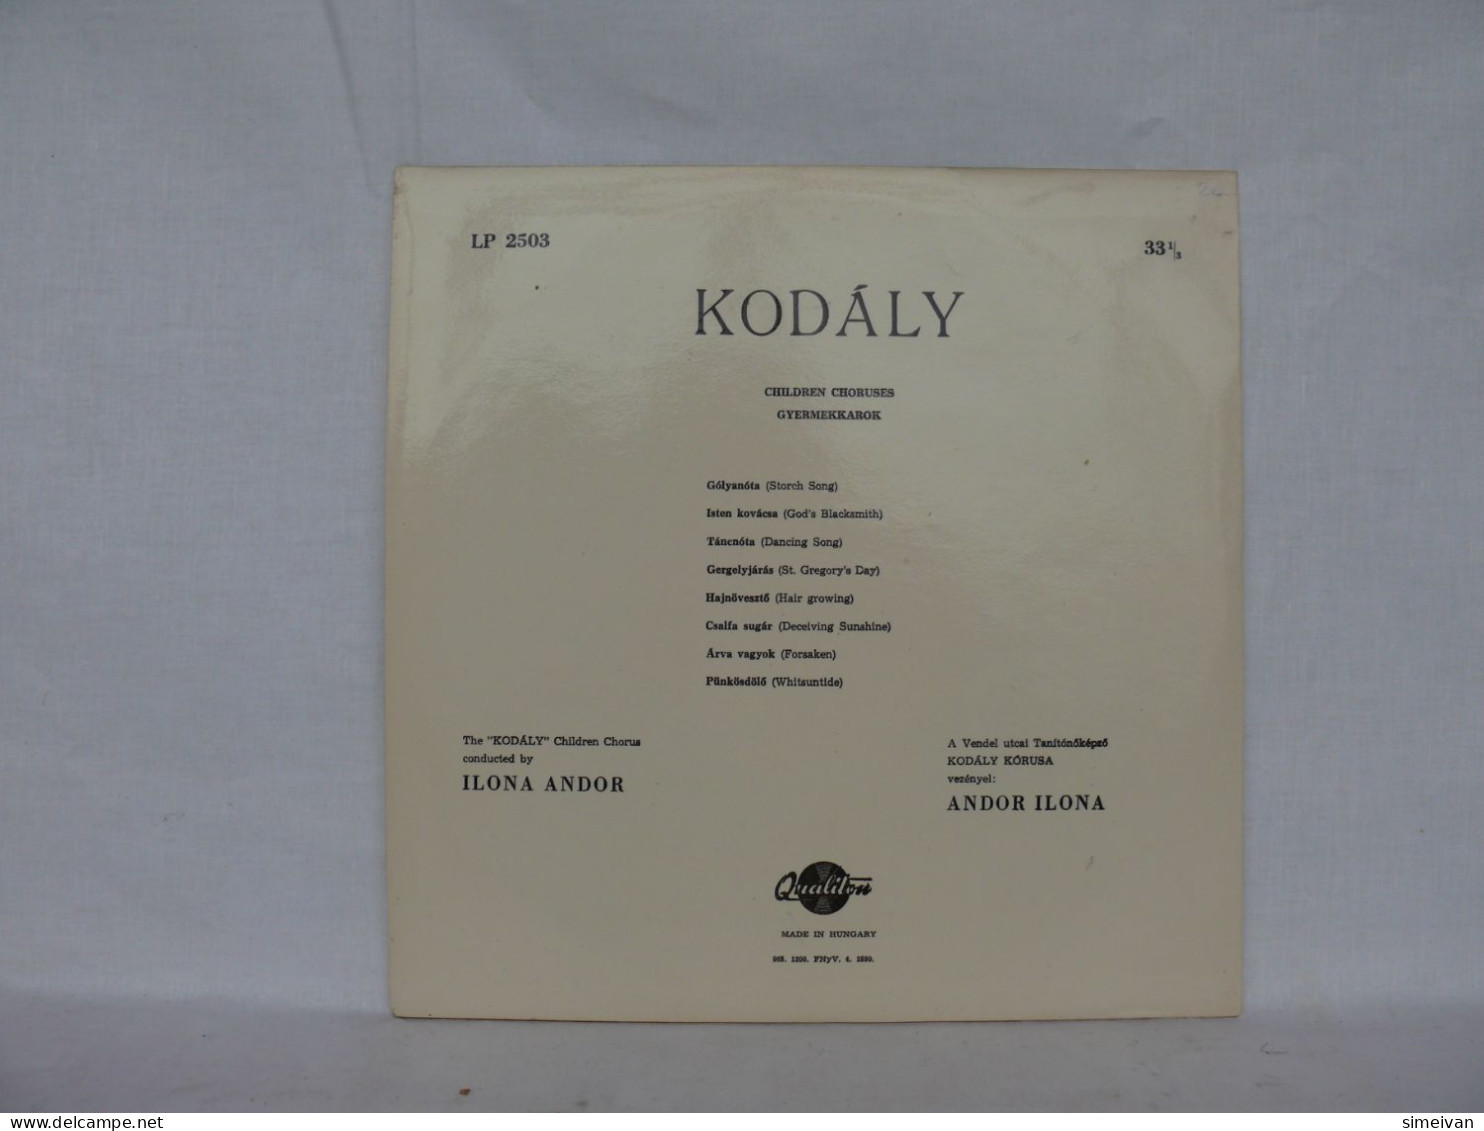 ZOLTAN KODALY CHILDREN AND FEMALE CHORUSES VINYL MADE IN HUNGARY QUALITON #1692 - Kinderlieder